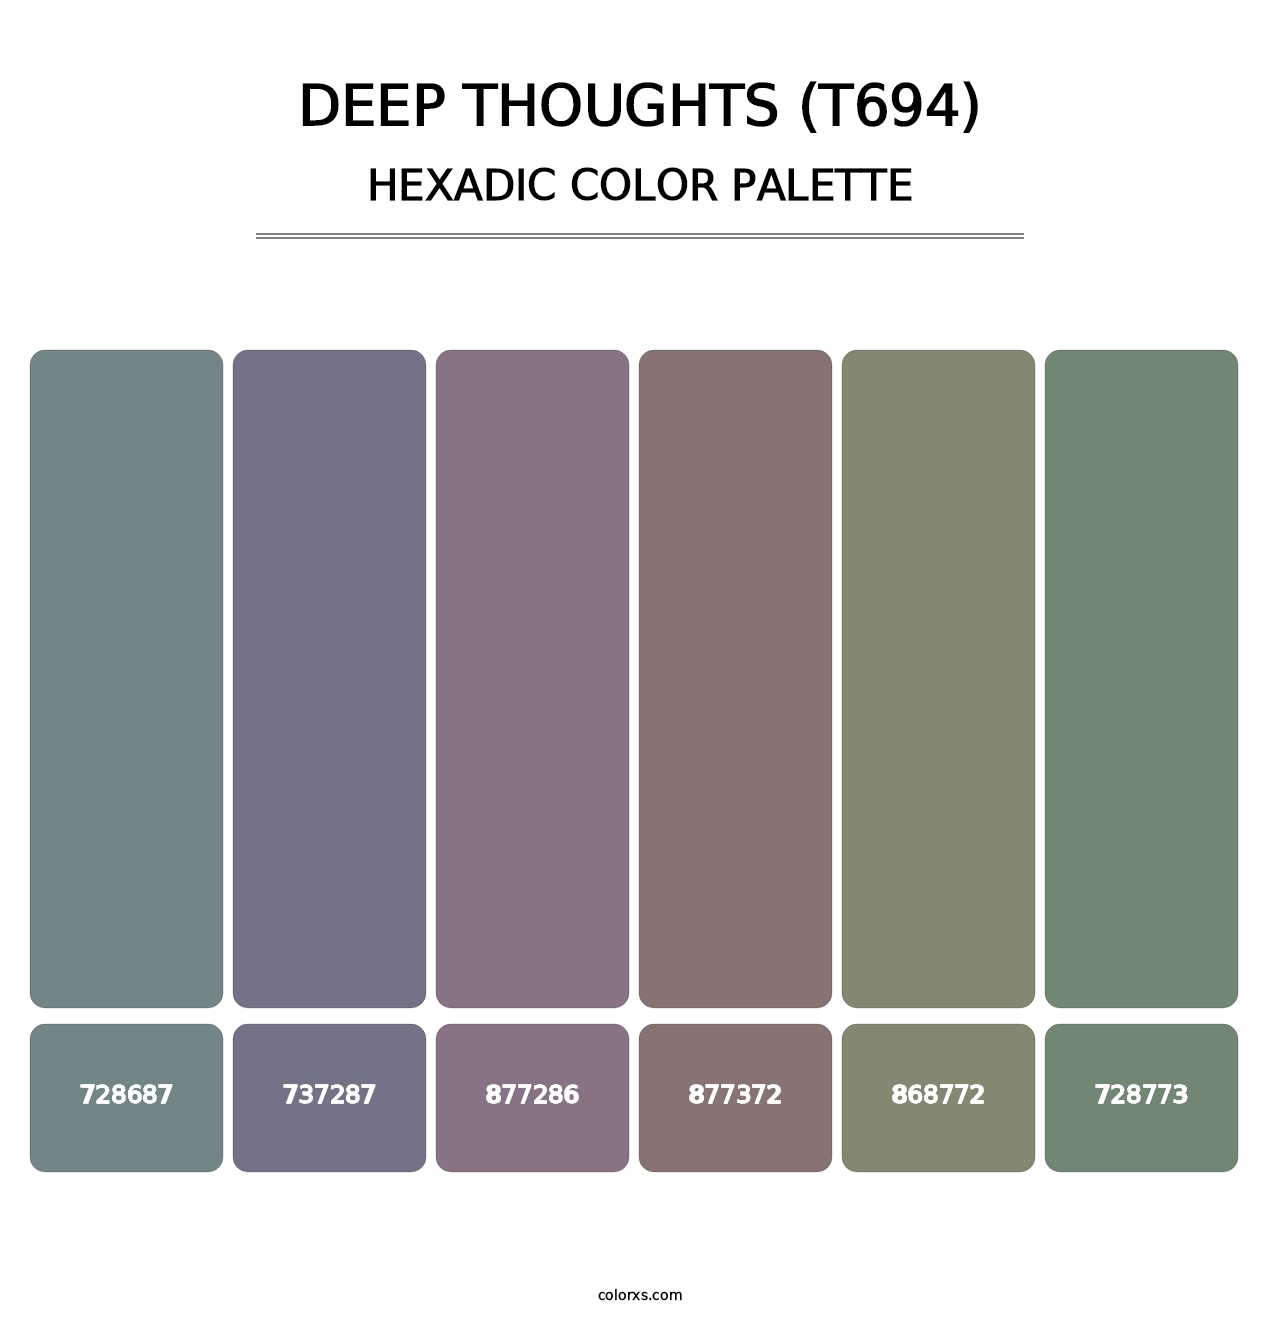 Deep Thoughts (T694) - Hexadic Color Palette